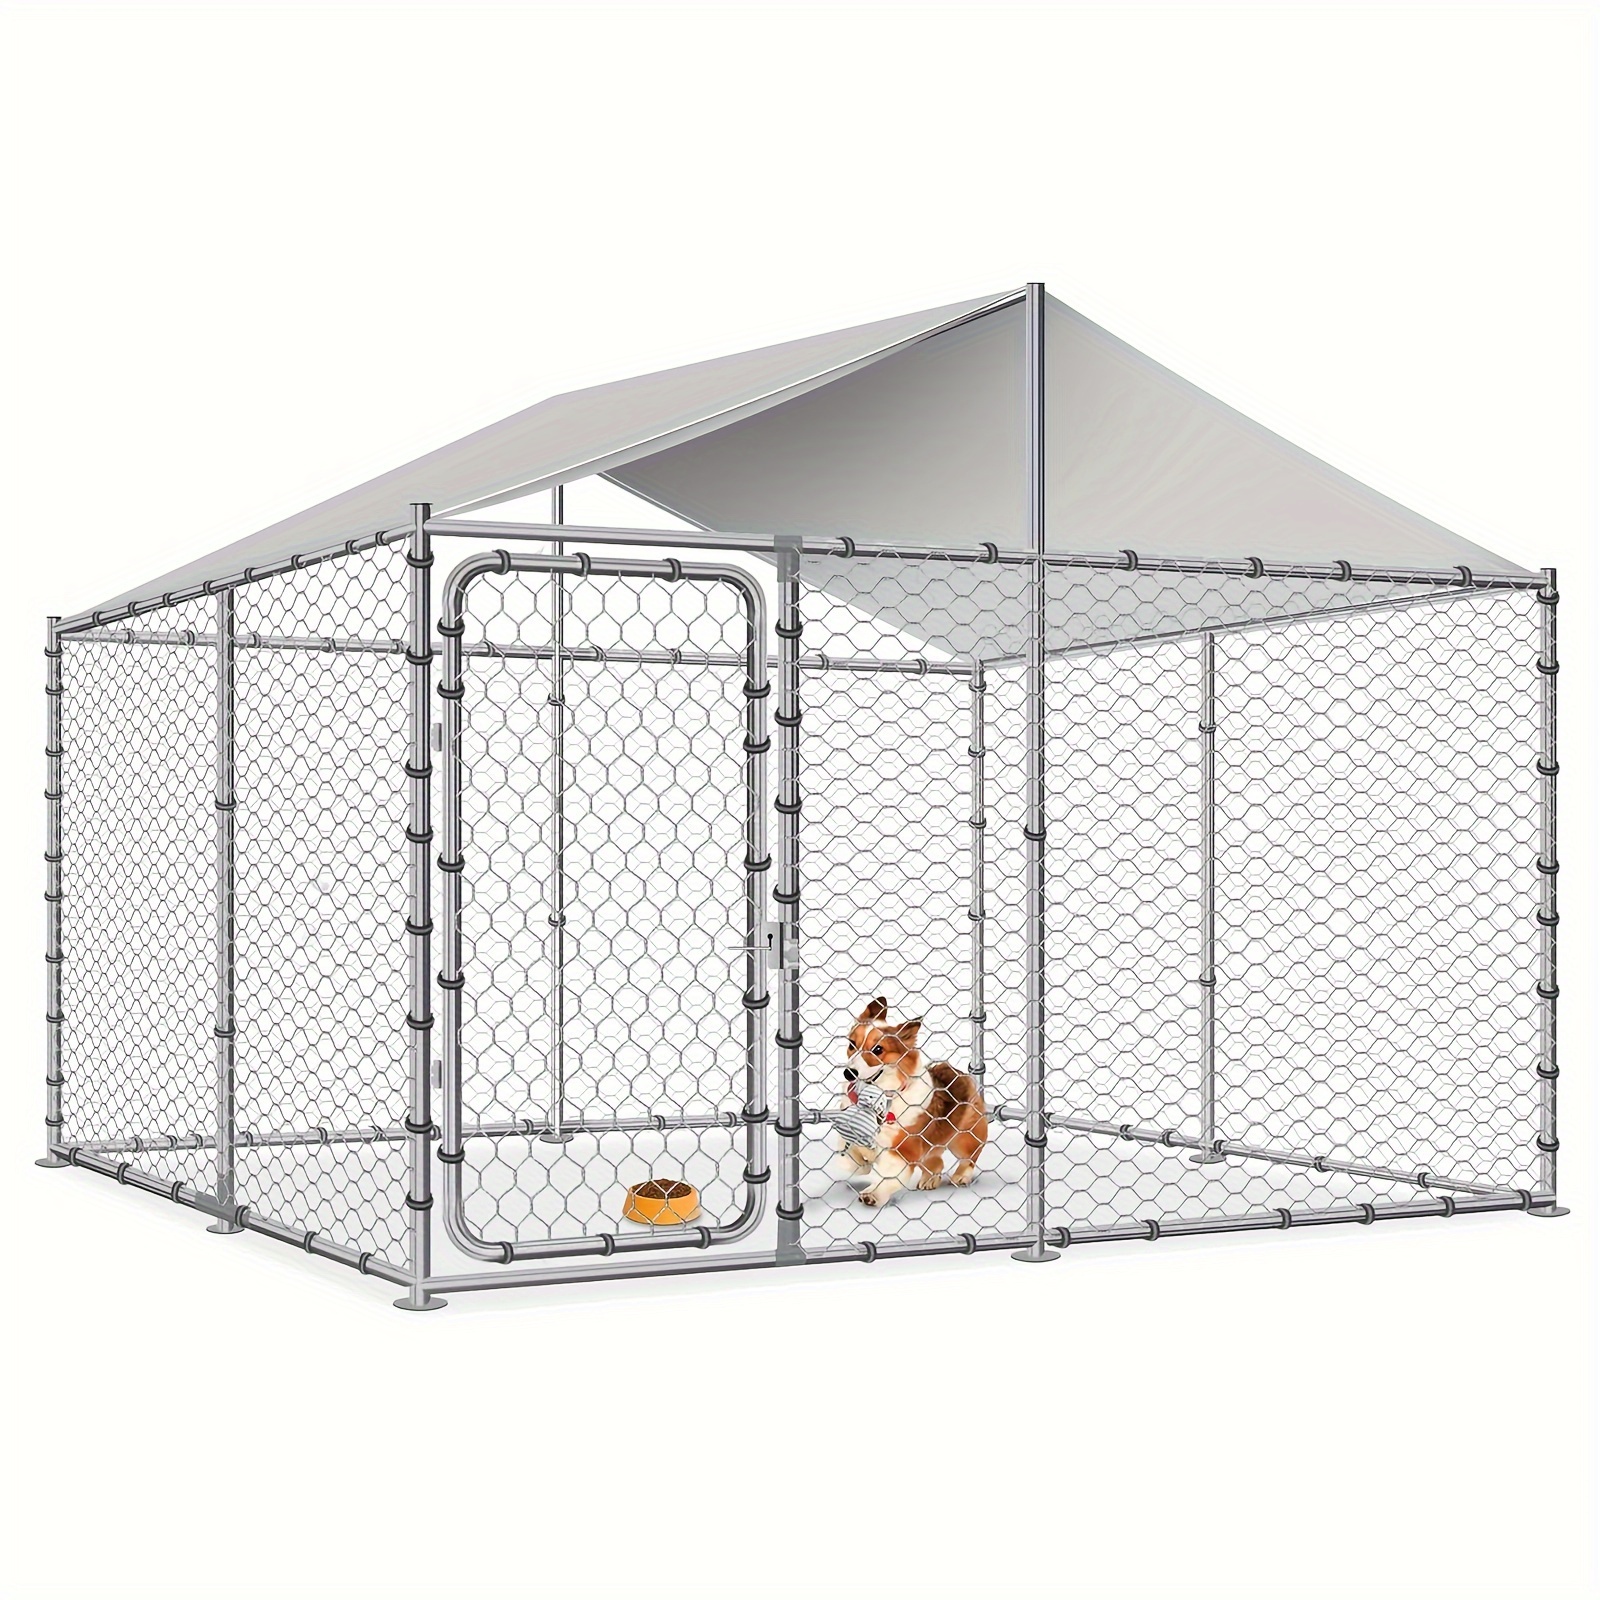 

Titimo Heavy Duty Outdoor Dog Kennel Large Dog Cage Galvanized Steel Pet Playpen House With Waterproof Uv-resistant Cover, Metal Mesh, Secure Lock (90 X 90 X 63 Inches)